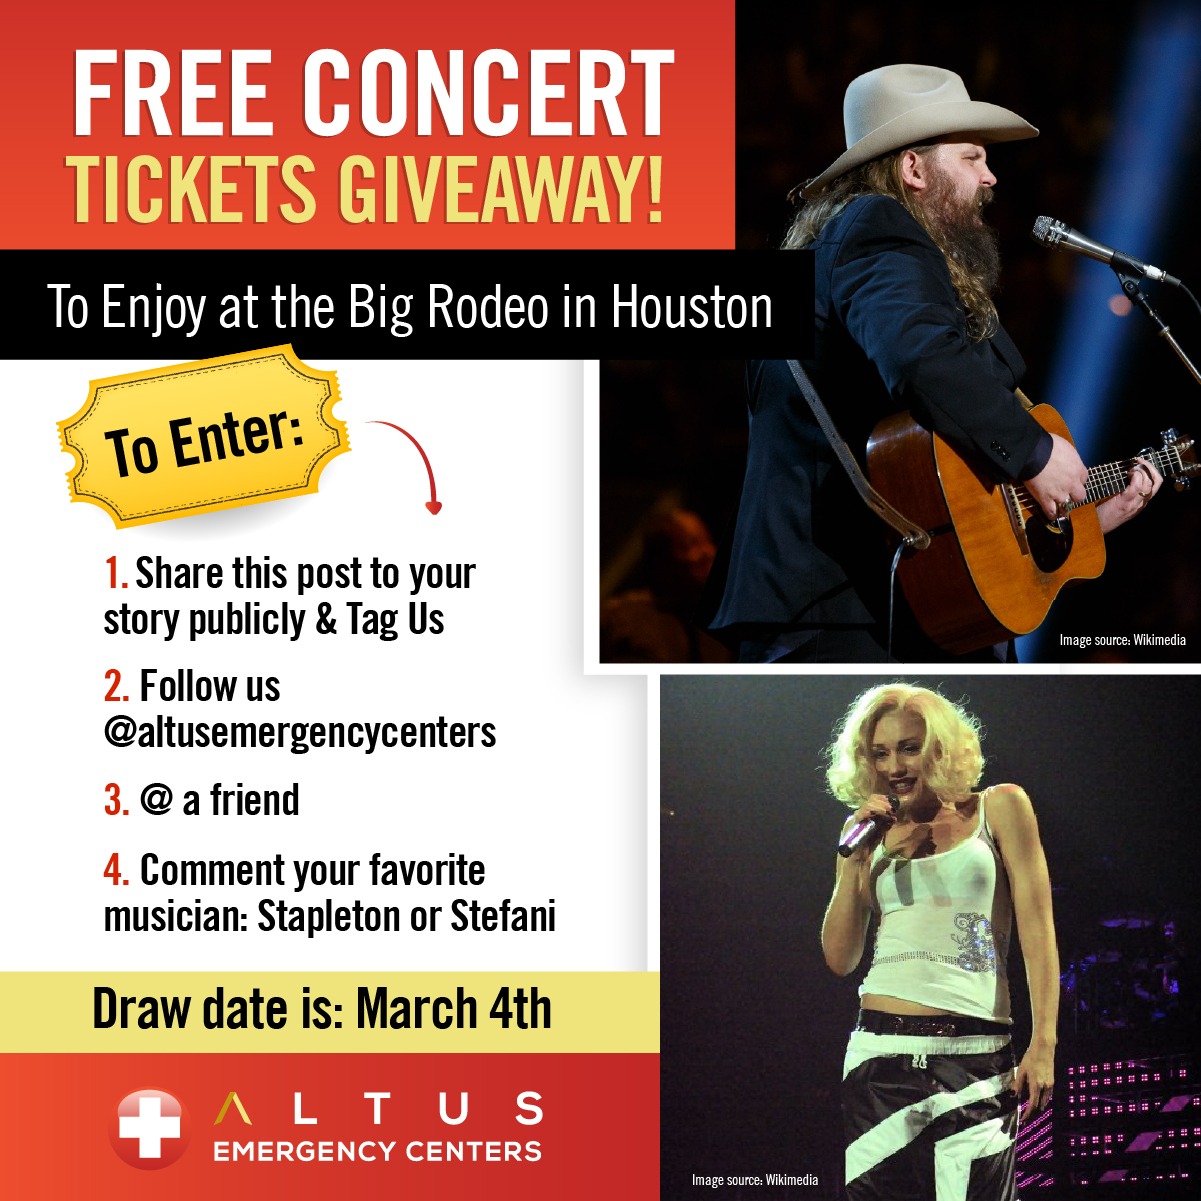 FREE Concert Tickets to the Big Rodeo in Houston